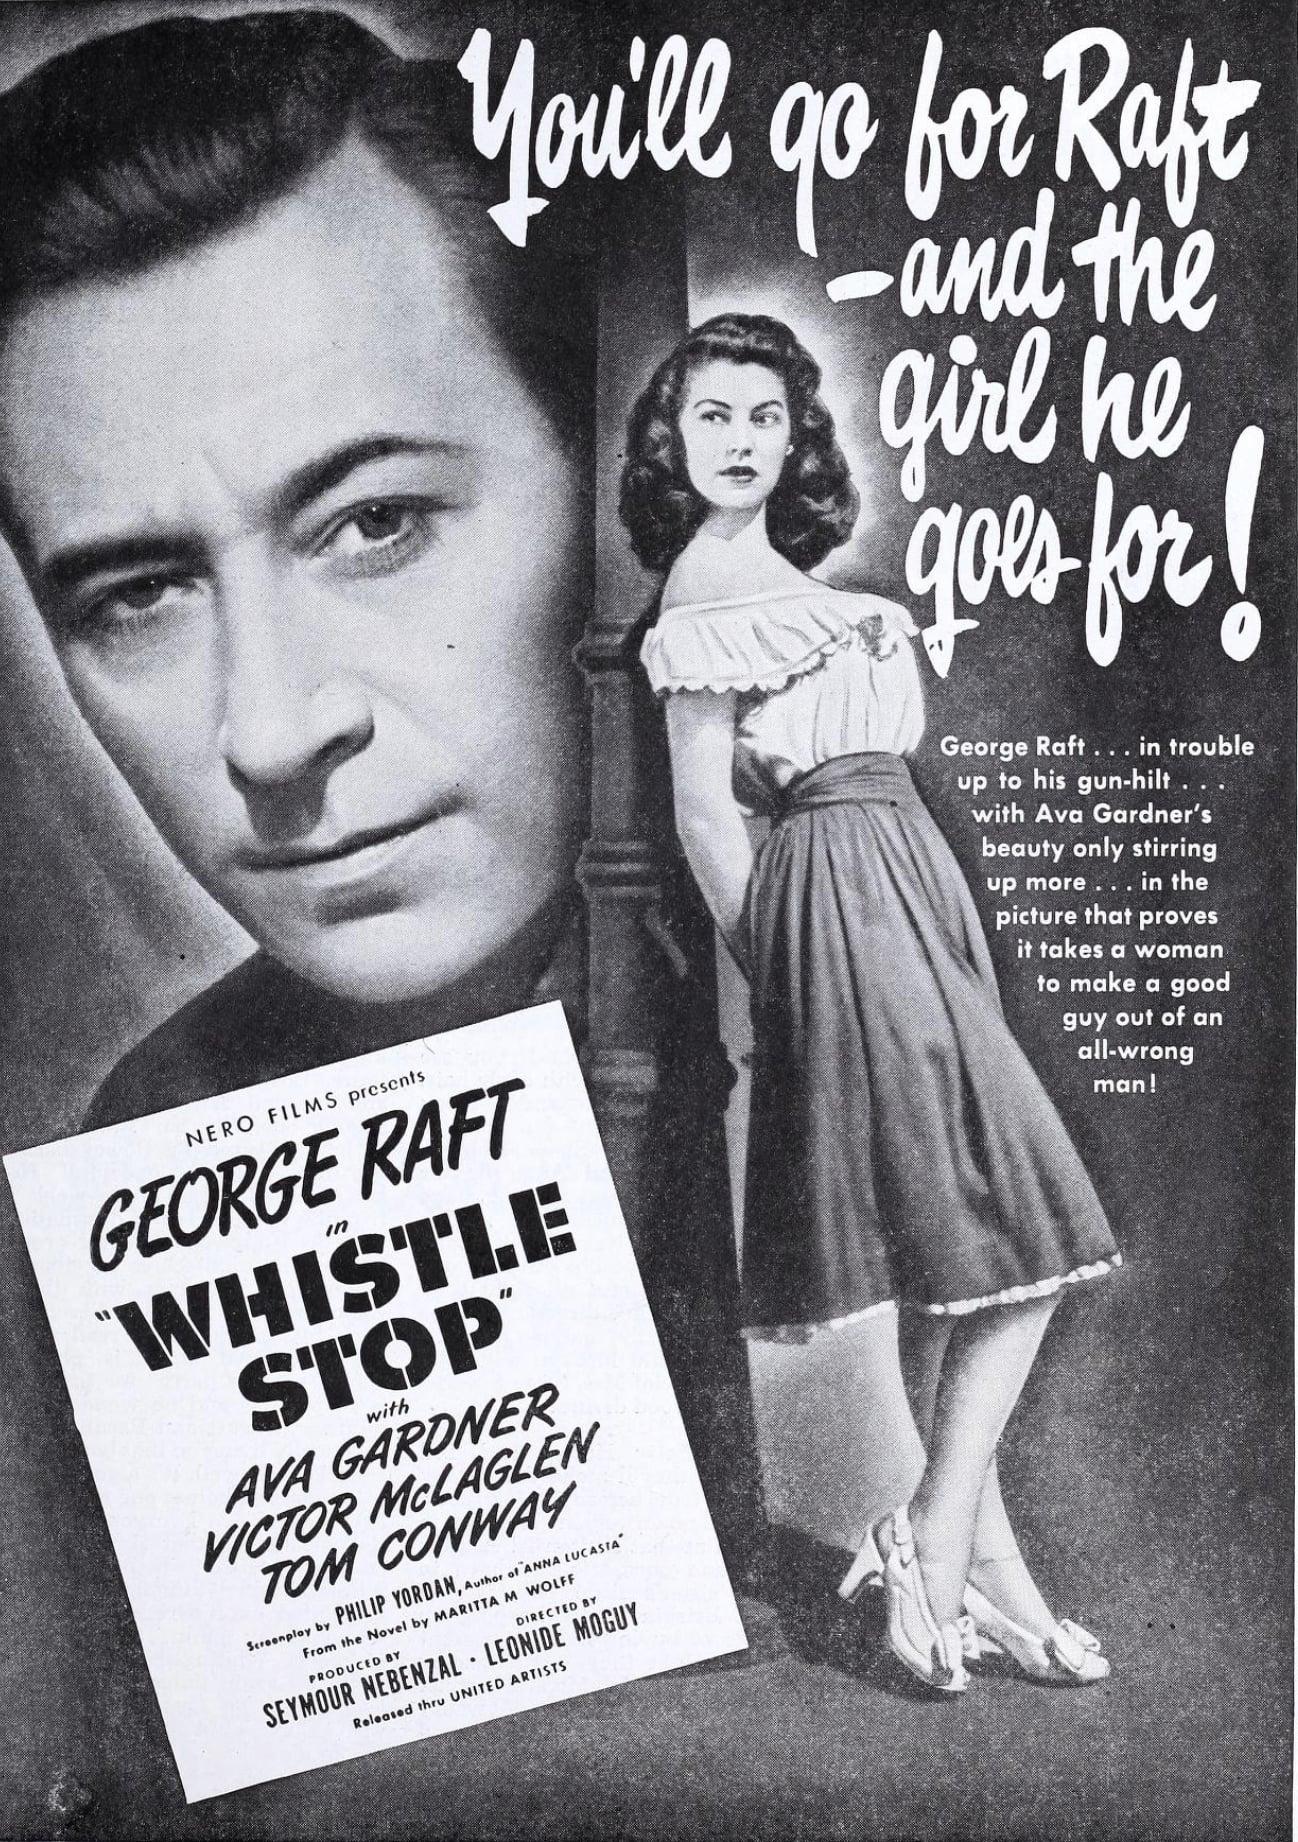 Whistle Stop poster